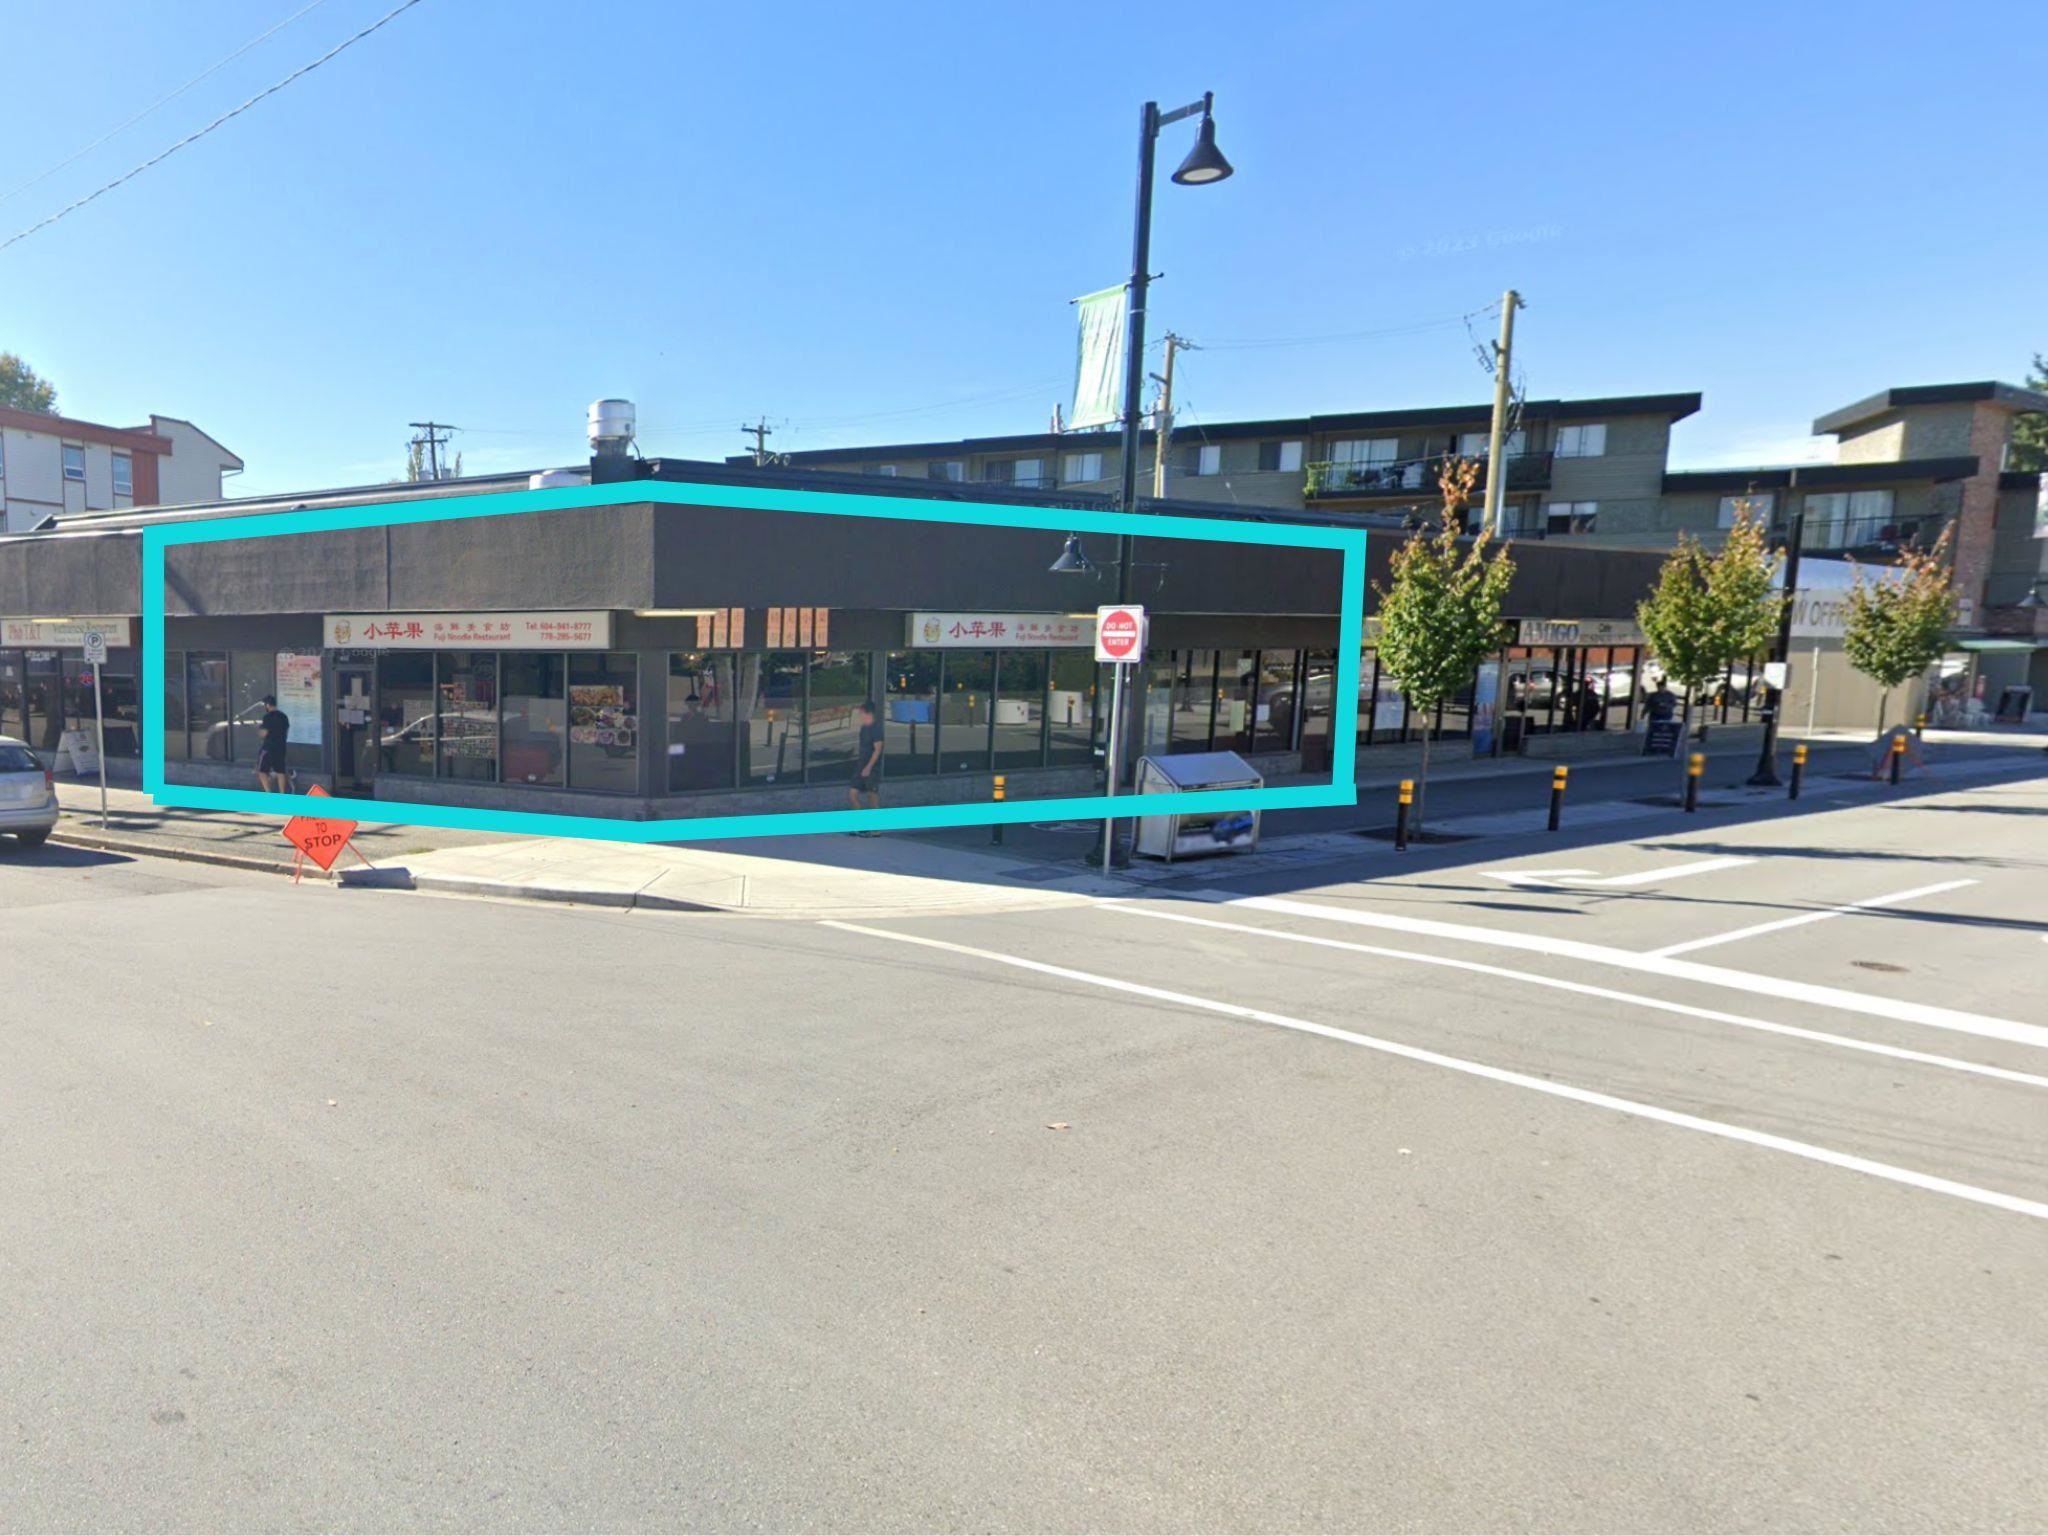 Central Pt Coquitlam Land Commercial for sale:    (Listed 6800-05-13)